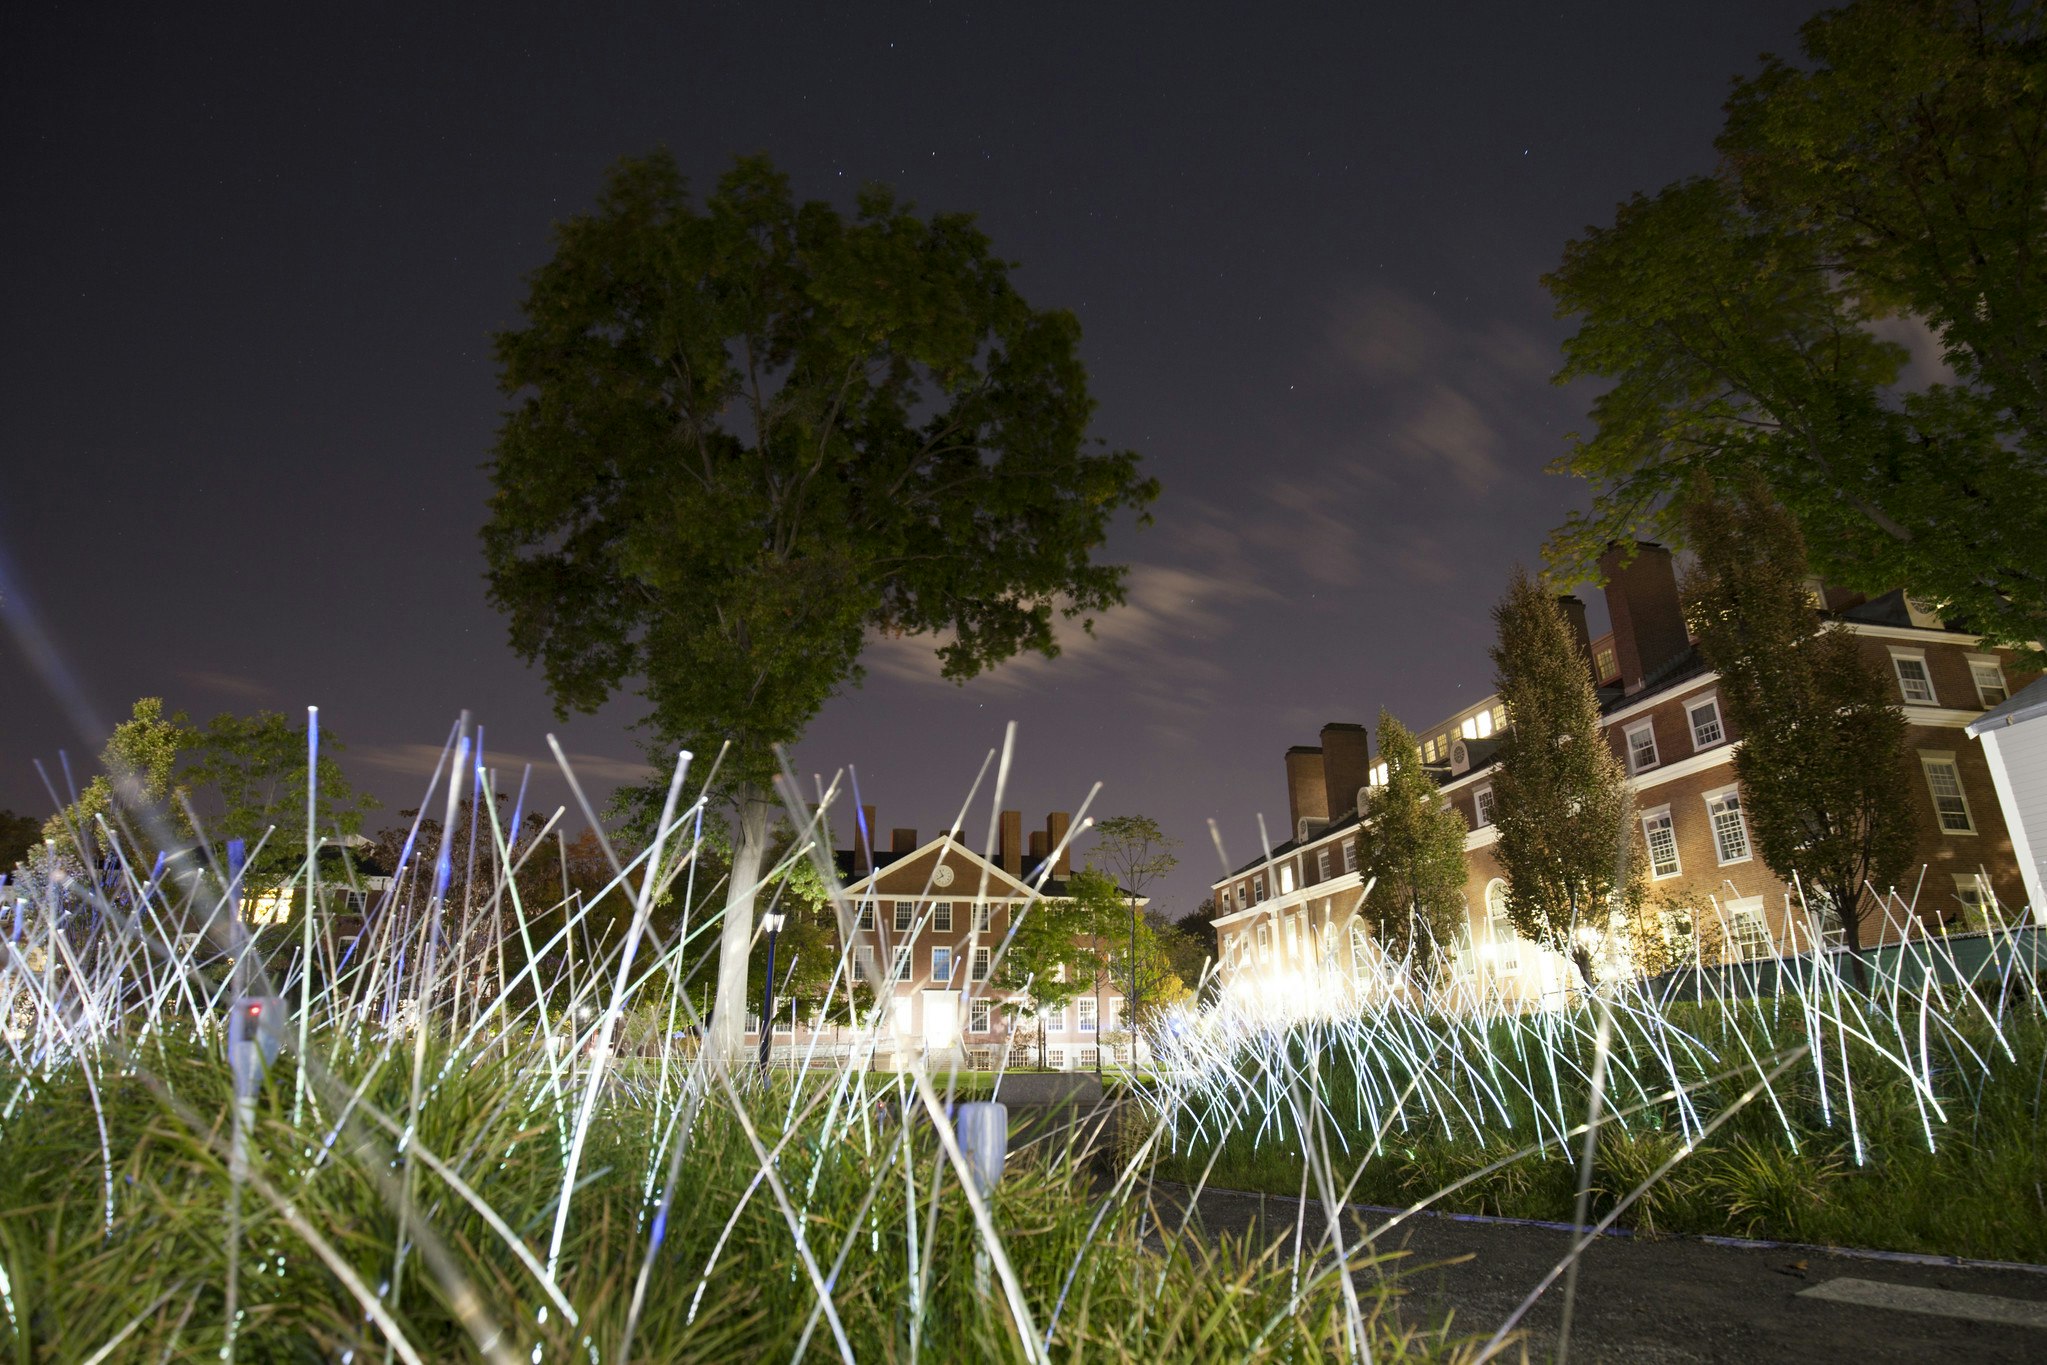 Long glow stick type light fixtures, standing on the grass on an evening. Buildings are in the background with a large tree. The sky is dark.